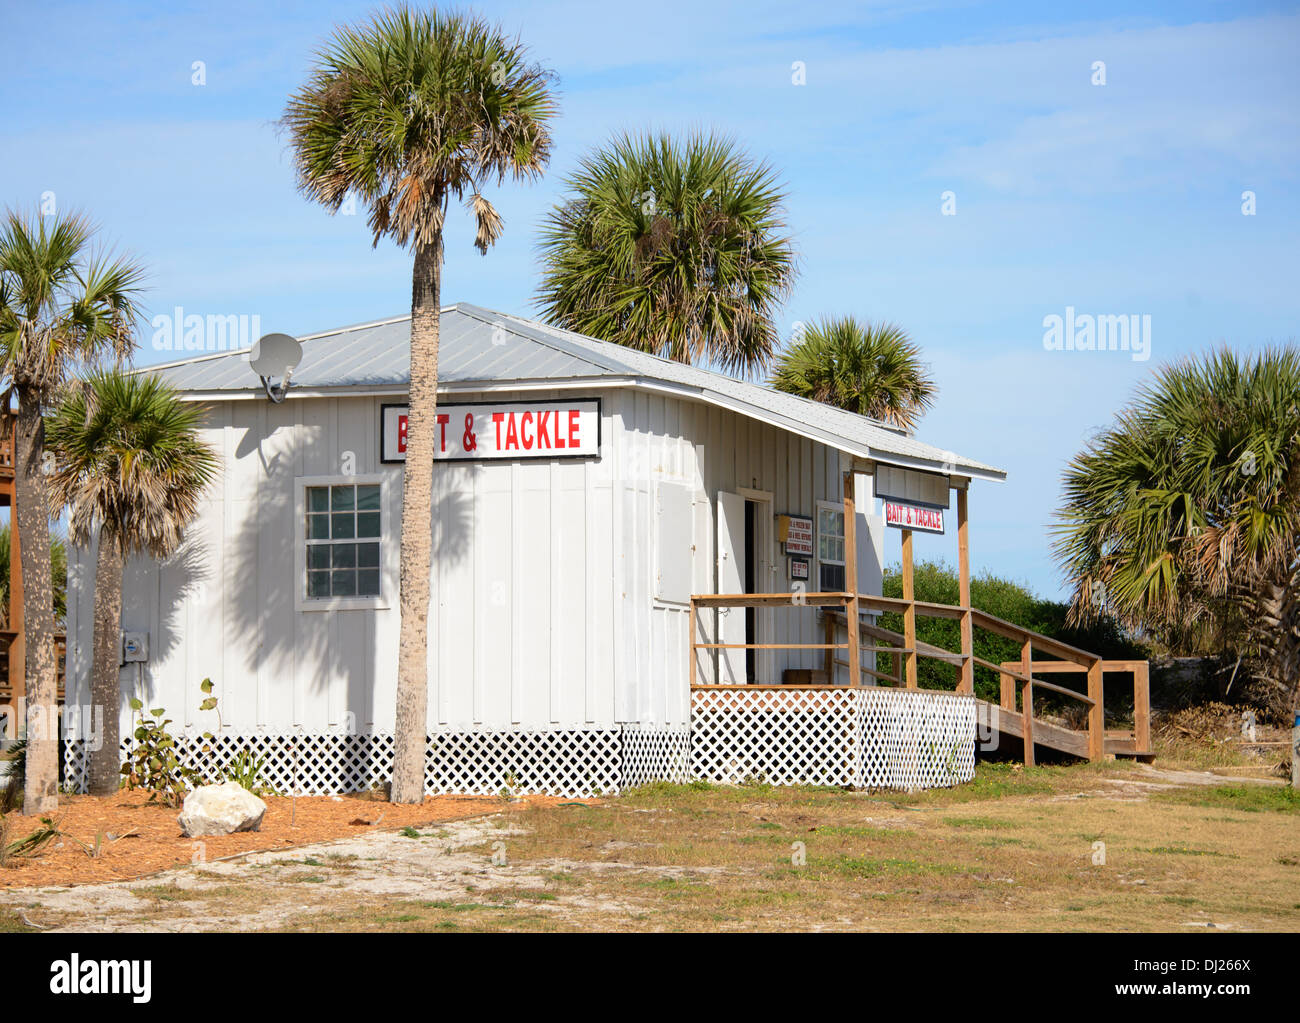 Bait shop with palm trees in Florida. Stock Photo